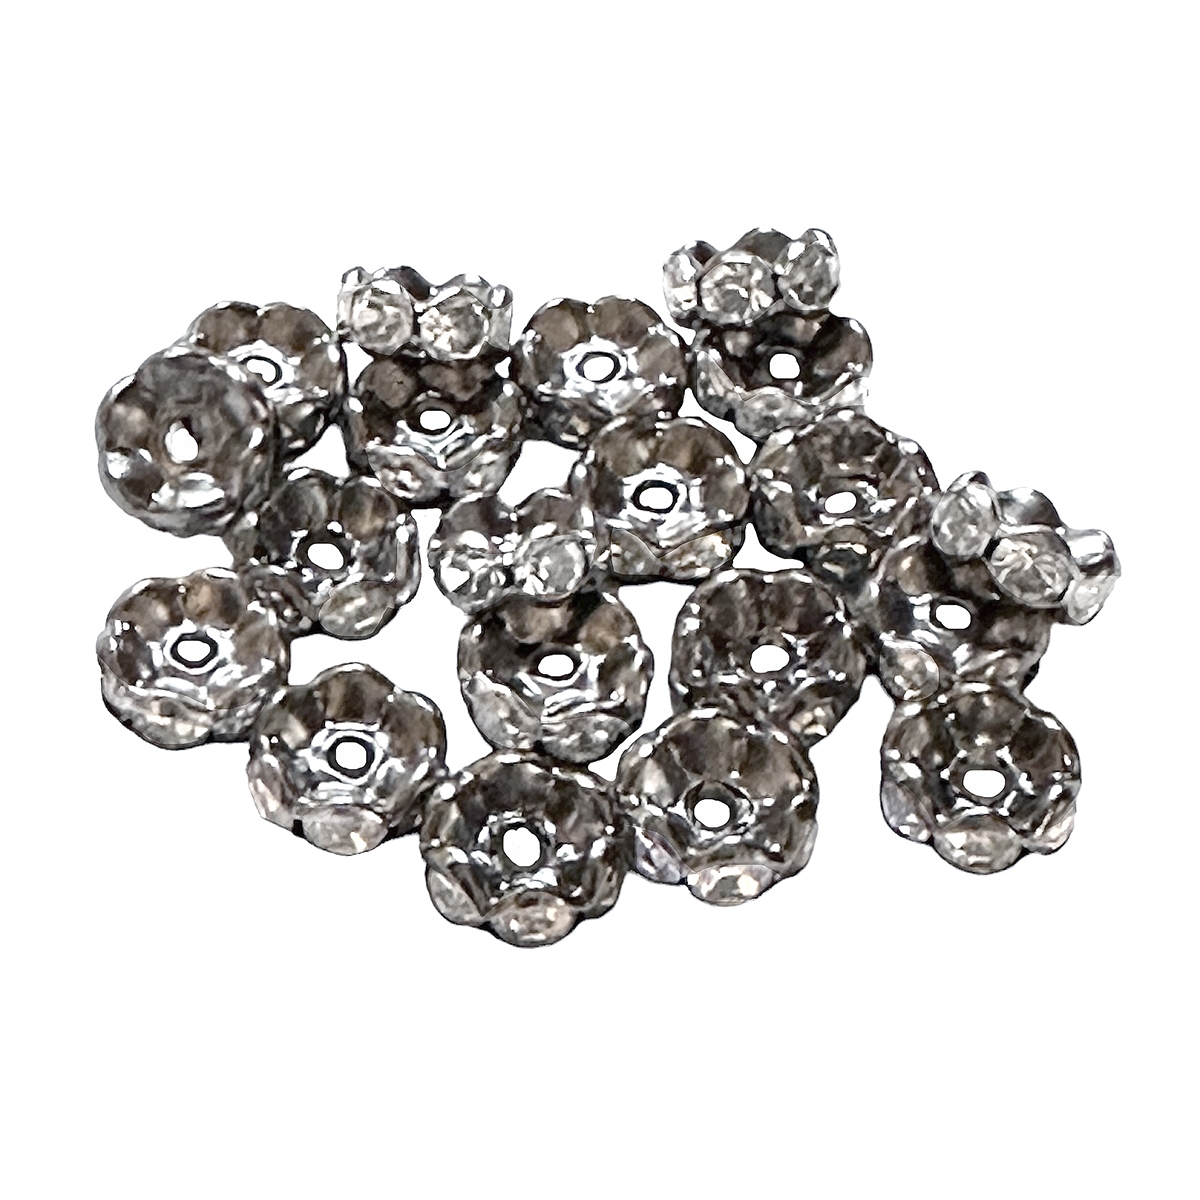 20 Wavy 13mm Round Silver 2 Hole Buttons or Textured Linking Charms